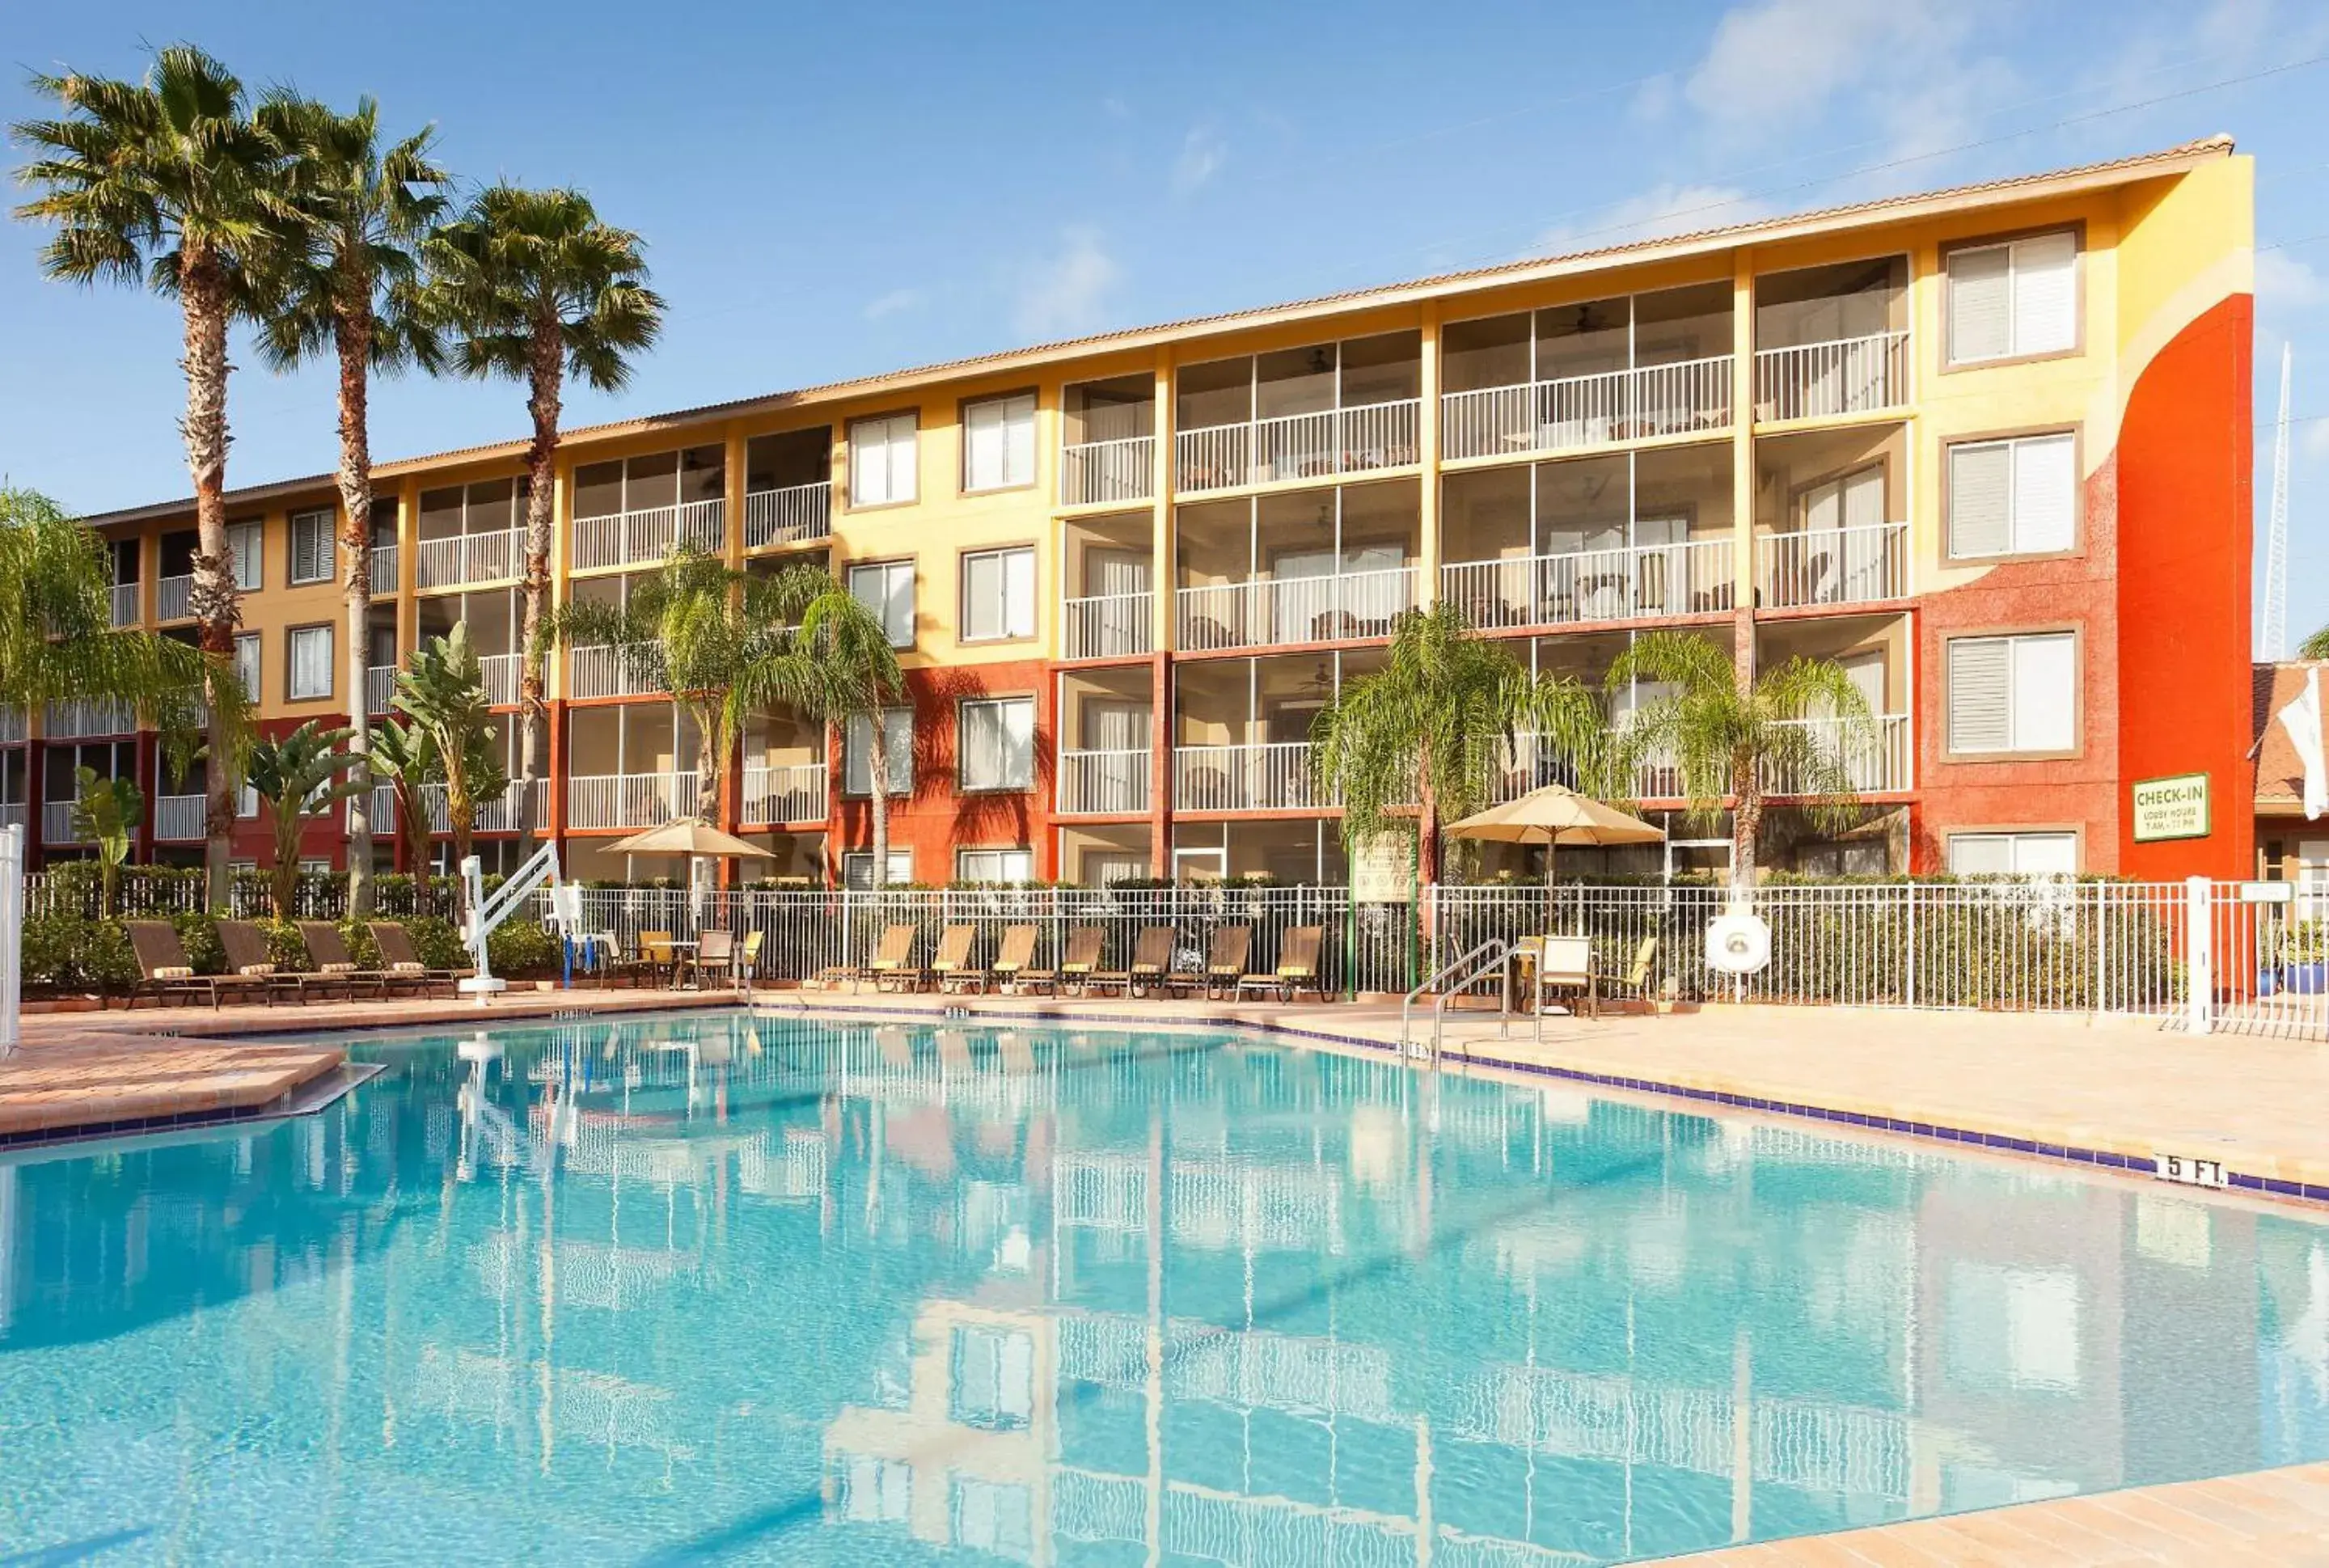 Swimming pool, Property Building in Bluegreen Vacations Orlando's Sunshine Resort